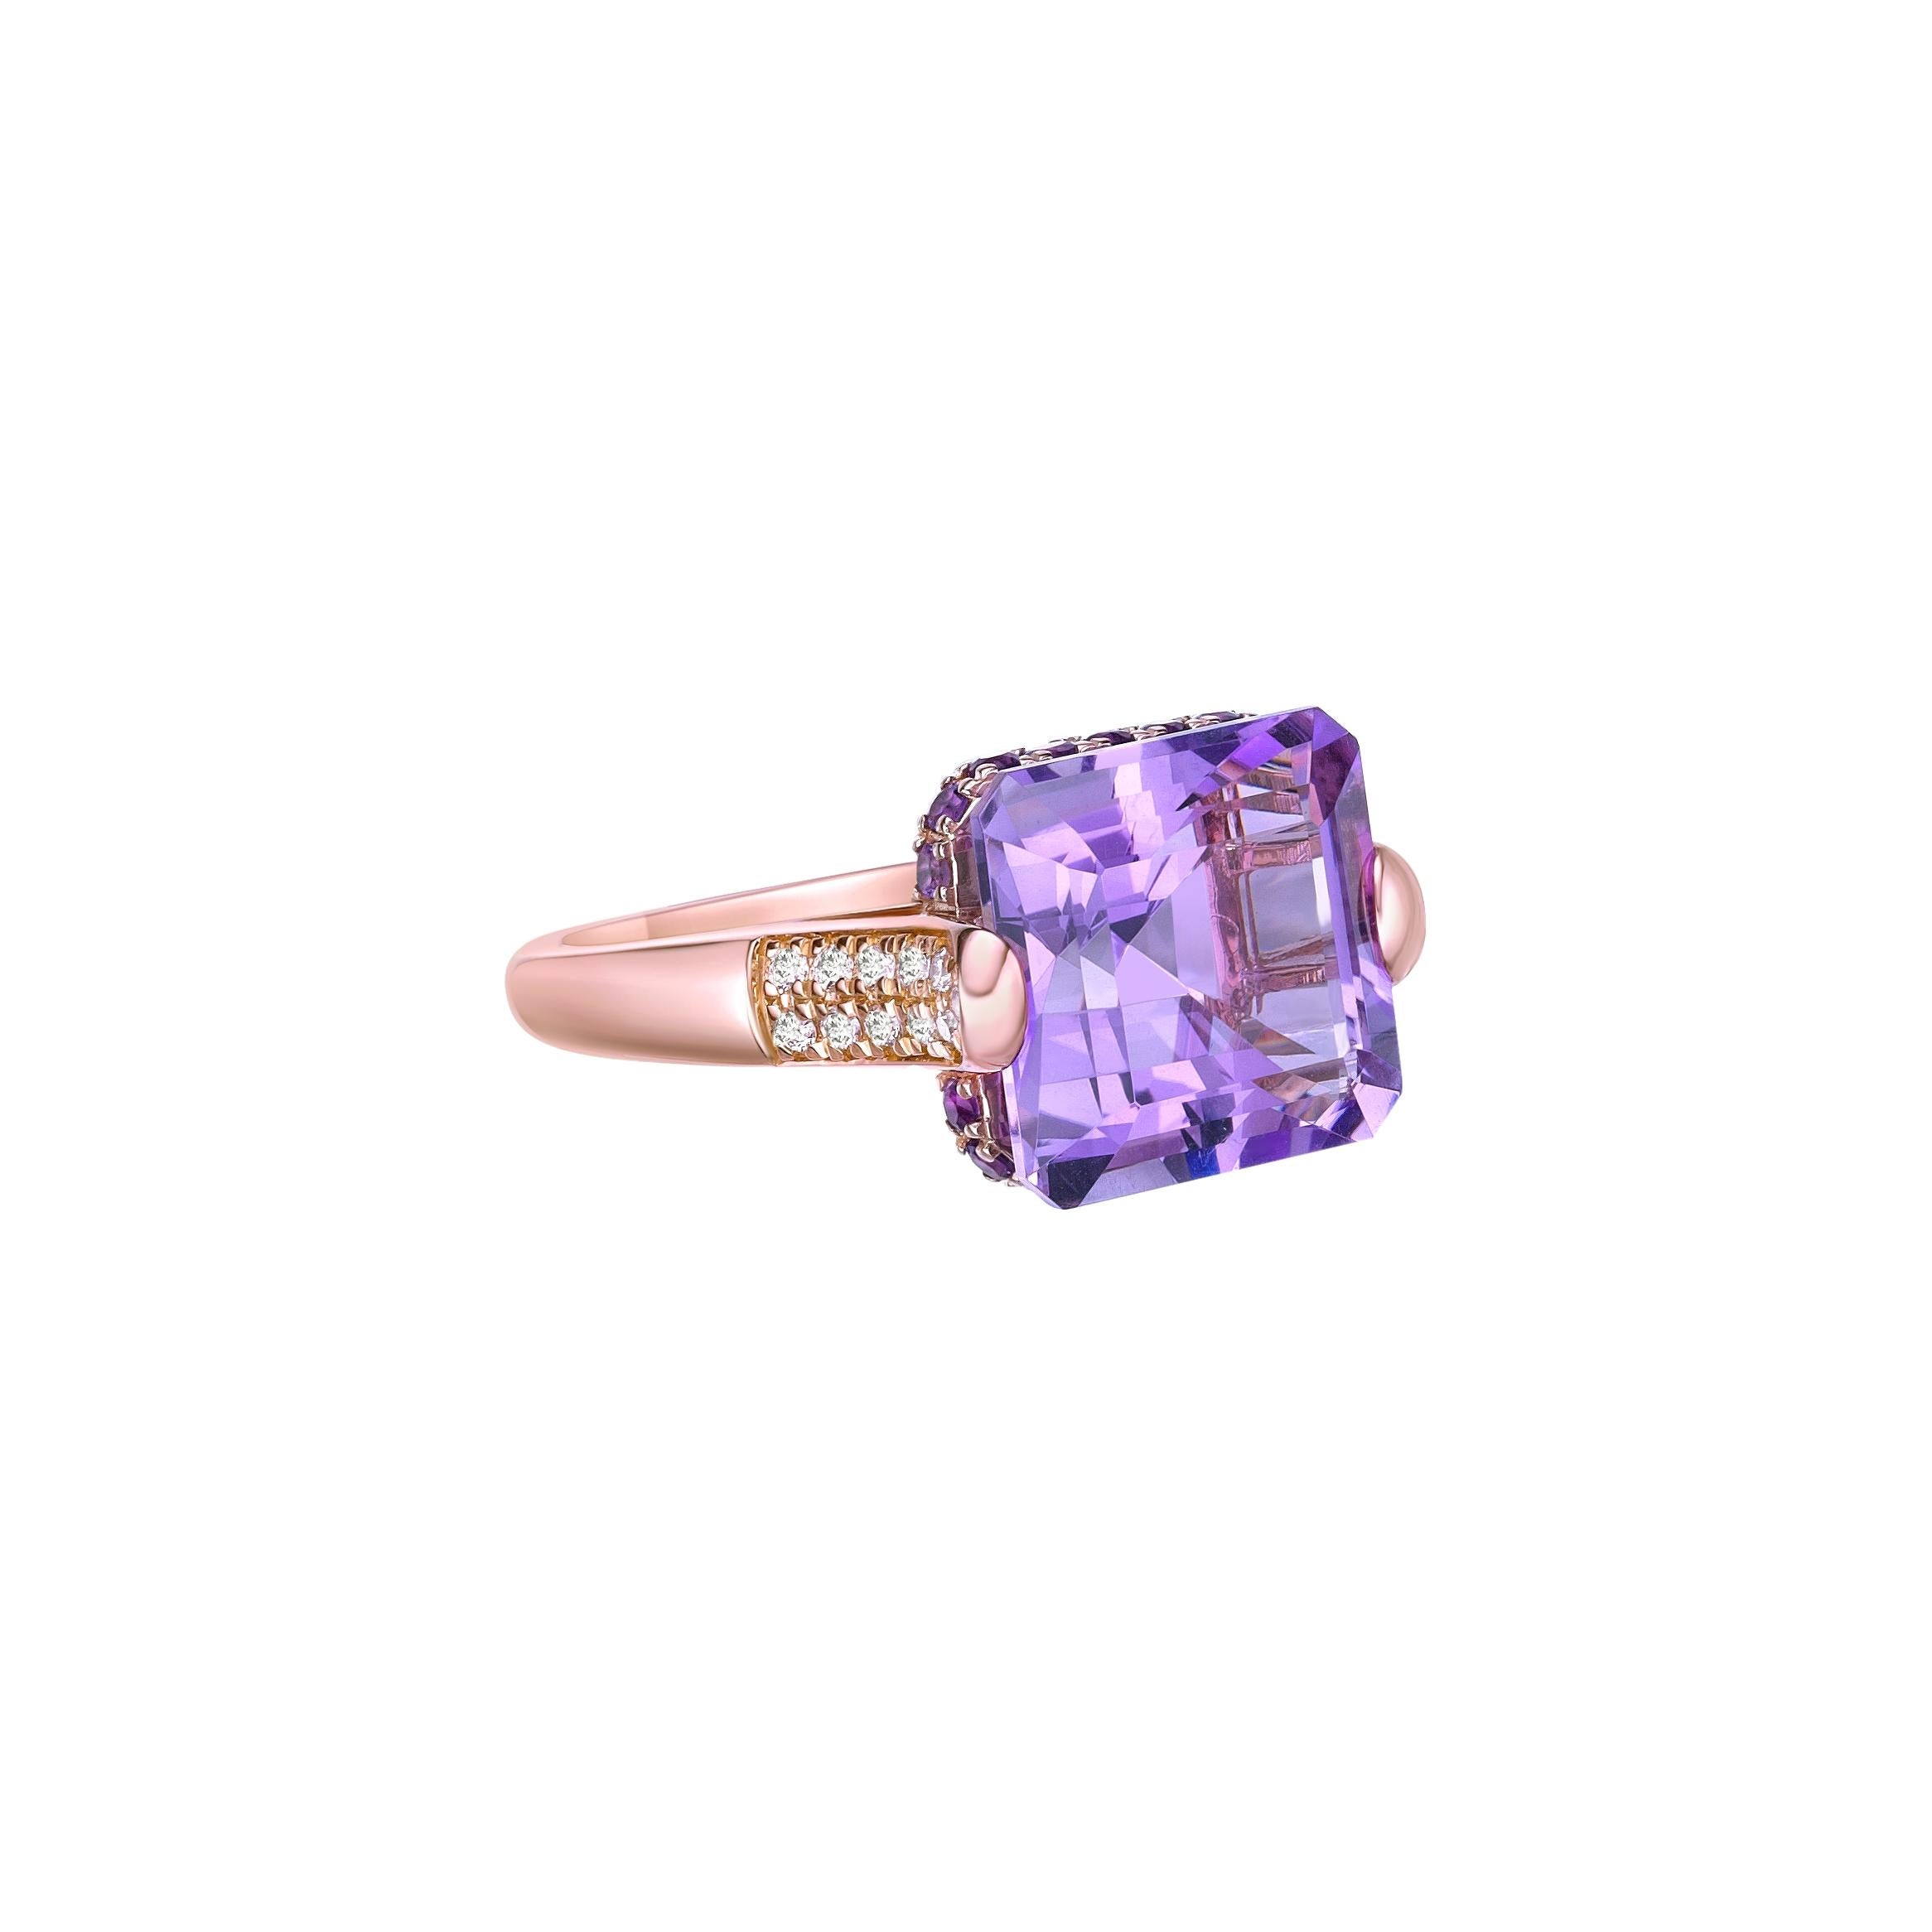 This is fancy Amethyst Ring in Octagon shape purple hue. The Ring is elegant and can be worn for many occasions. The Amethyst around the ring add to the beauty and elegance of the ring. 
  
Amethyst Fancy Ring in 18Karat Rose Gold with White